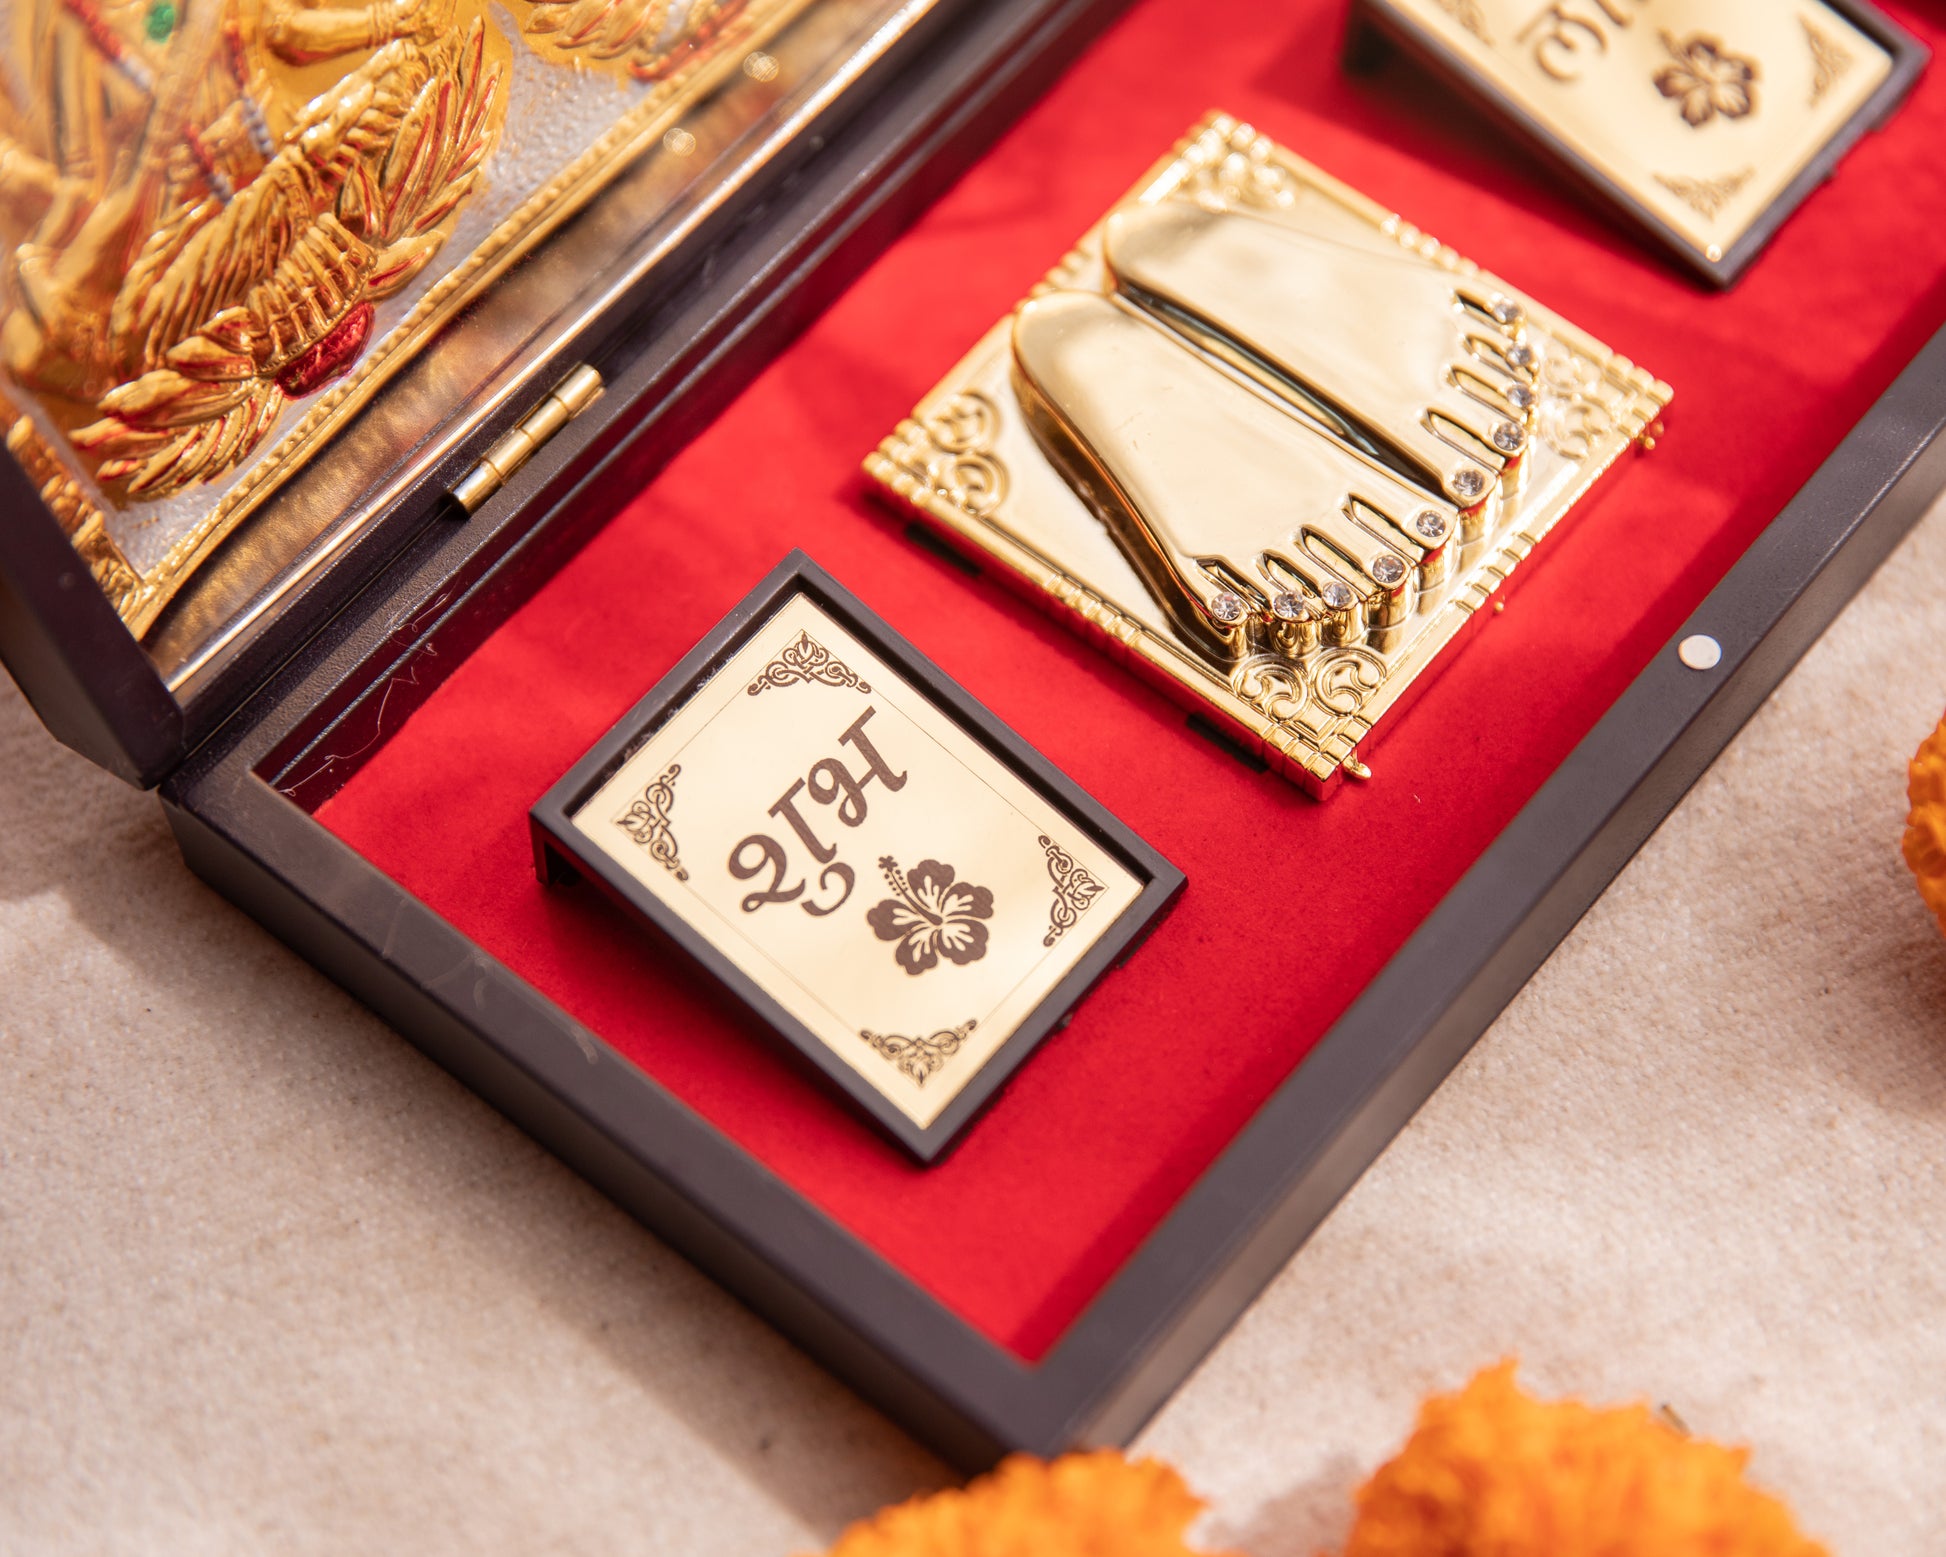 LeelaTheStore’s divine 24K Laxmi, Ganesh, and Saraswati Pooja Box, the 3 idols have been engraved onto the top half of the box and have been finely wrapped in gold foil.